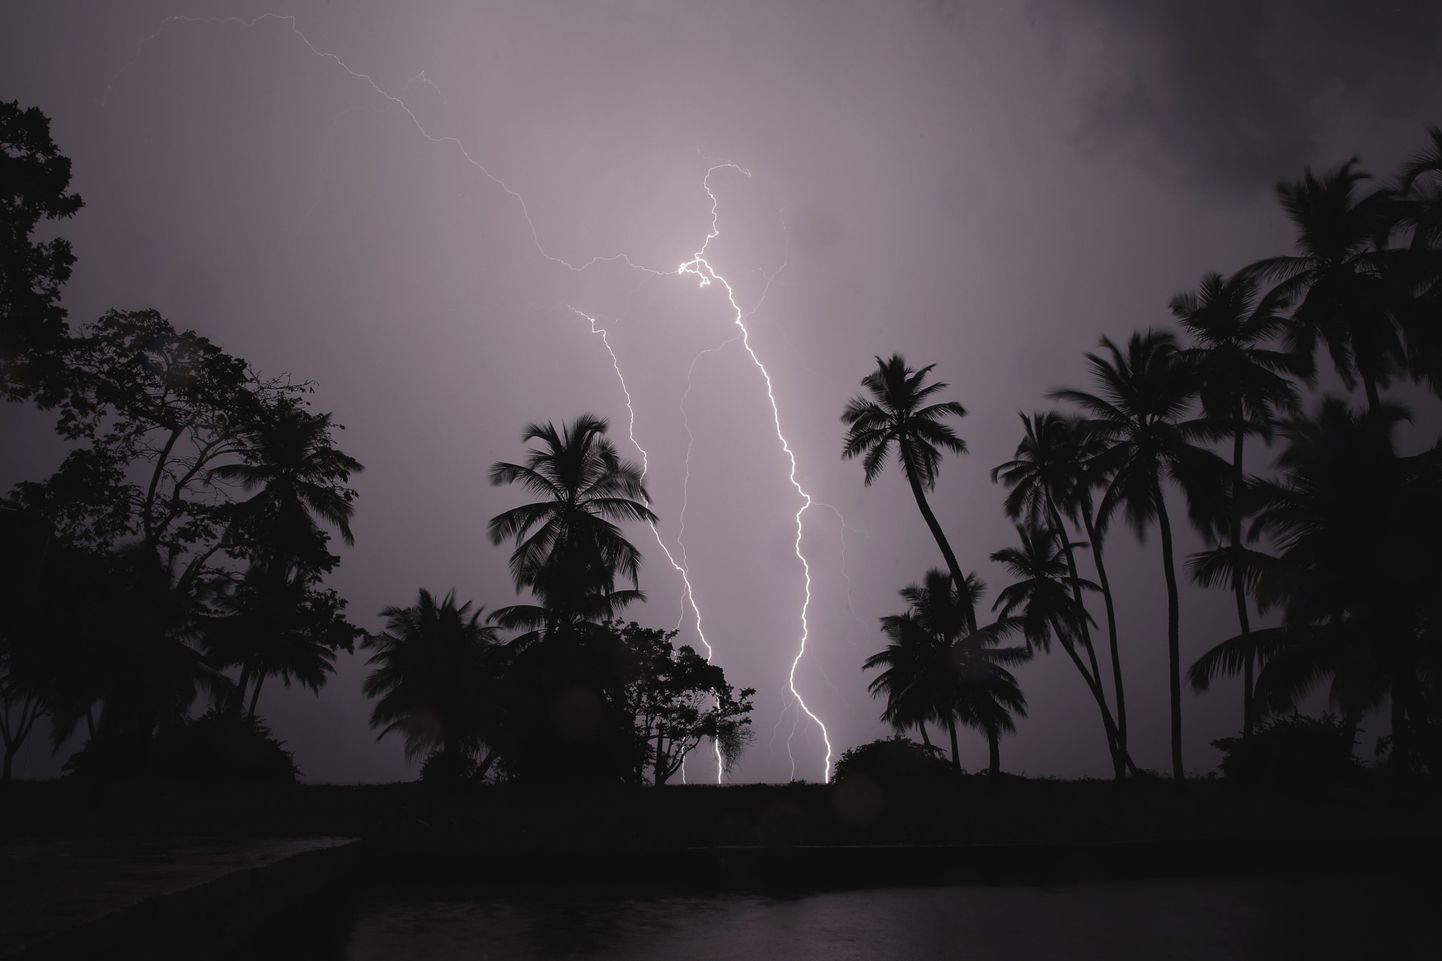 Lightning strikes over Lake Maracaibo in the village of Ologa, where the Catatumbo River feeds into the lake, in the western state of Zulia October 23, 2014. This year the Catatumbo Lightning was approved for inclusion in the 2015 edition of Guinness World Records, dethroning the Congolese town of Kifuka as the place with the world's most lightning bolts per square kilometer each year at 250. Scientists think the Catatumbo, named for a river that runs into the lake, is normal lightning that just happens to occur far more than anywhere else, due to local topography and wind patterns. Picture taken with long exposure October 23, 2014.  REUTERS/Jorge Silva (VENEZUELA - Tags: SOCIETY ENVIRONMENT TPX IMAGES OF THE DAY)

ATTENTION EDITORS: PICTURE 10 OF 20 FOR WIDER IMAGE PACKAGE 'VENEZUELA'S ETERNAL STORM'  
TO FIND ALL IMAGES SEARCH 'CATATUMBO LIGHTNING'